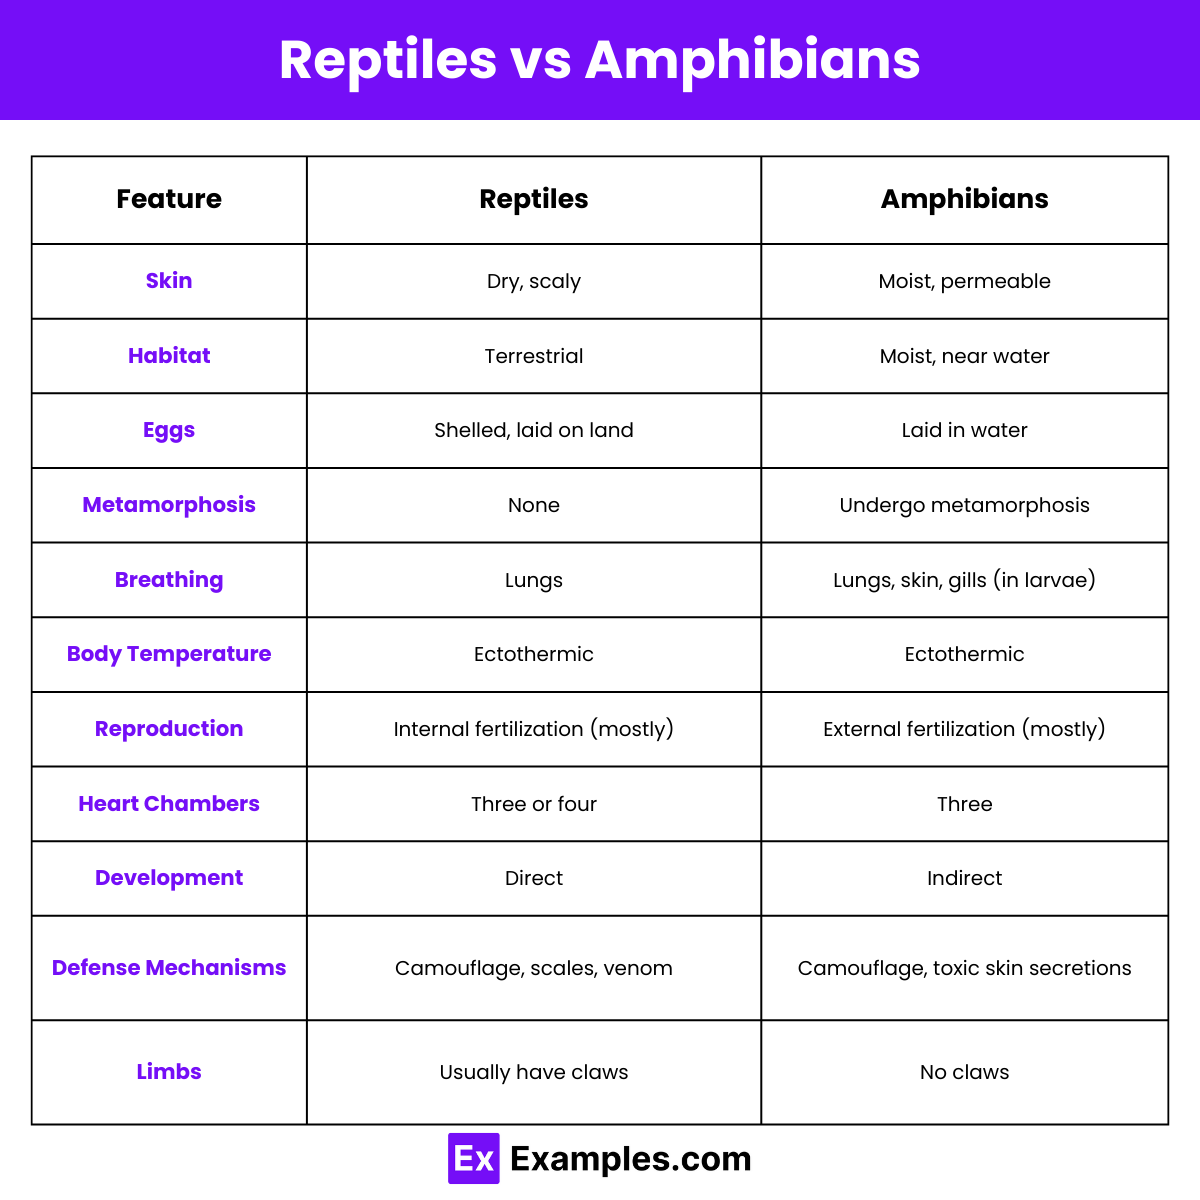 Differences Between Reptiles and Amphibians